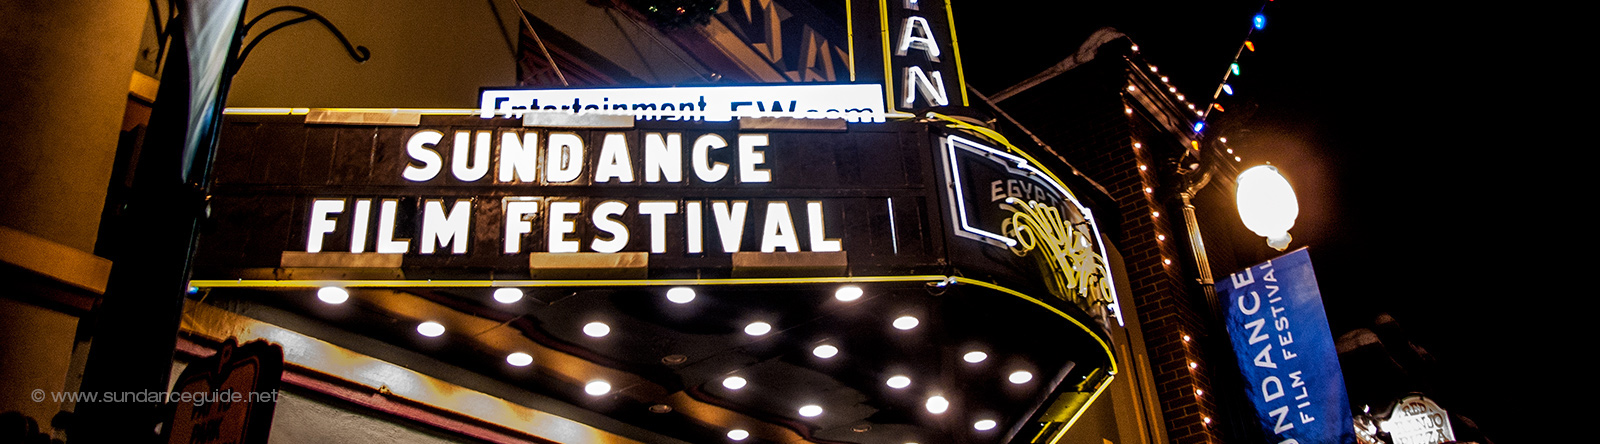 A picture of the Sundance Film Festival marquee at the Egyptian Theatre, Park City, Utah